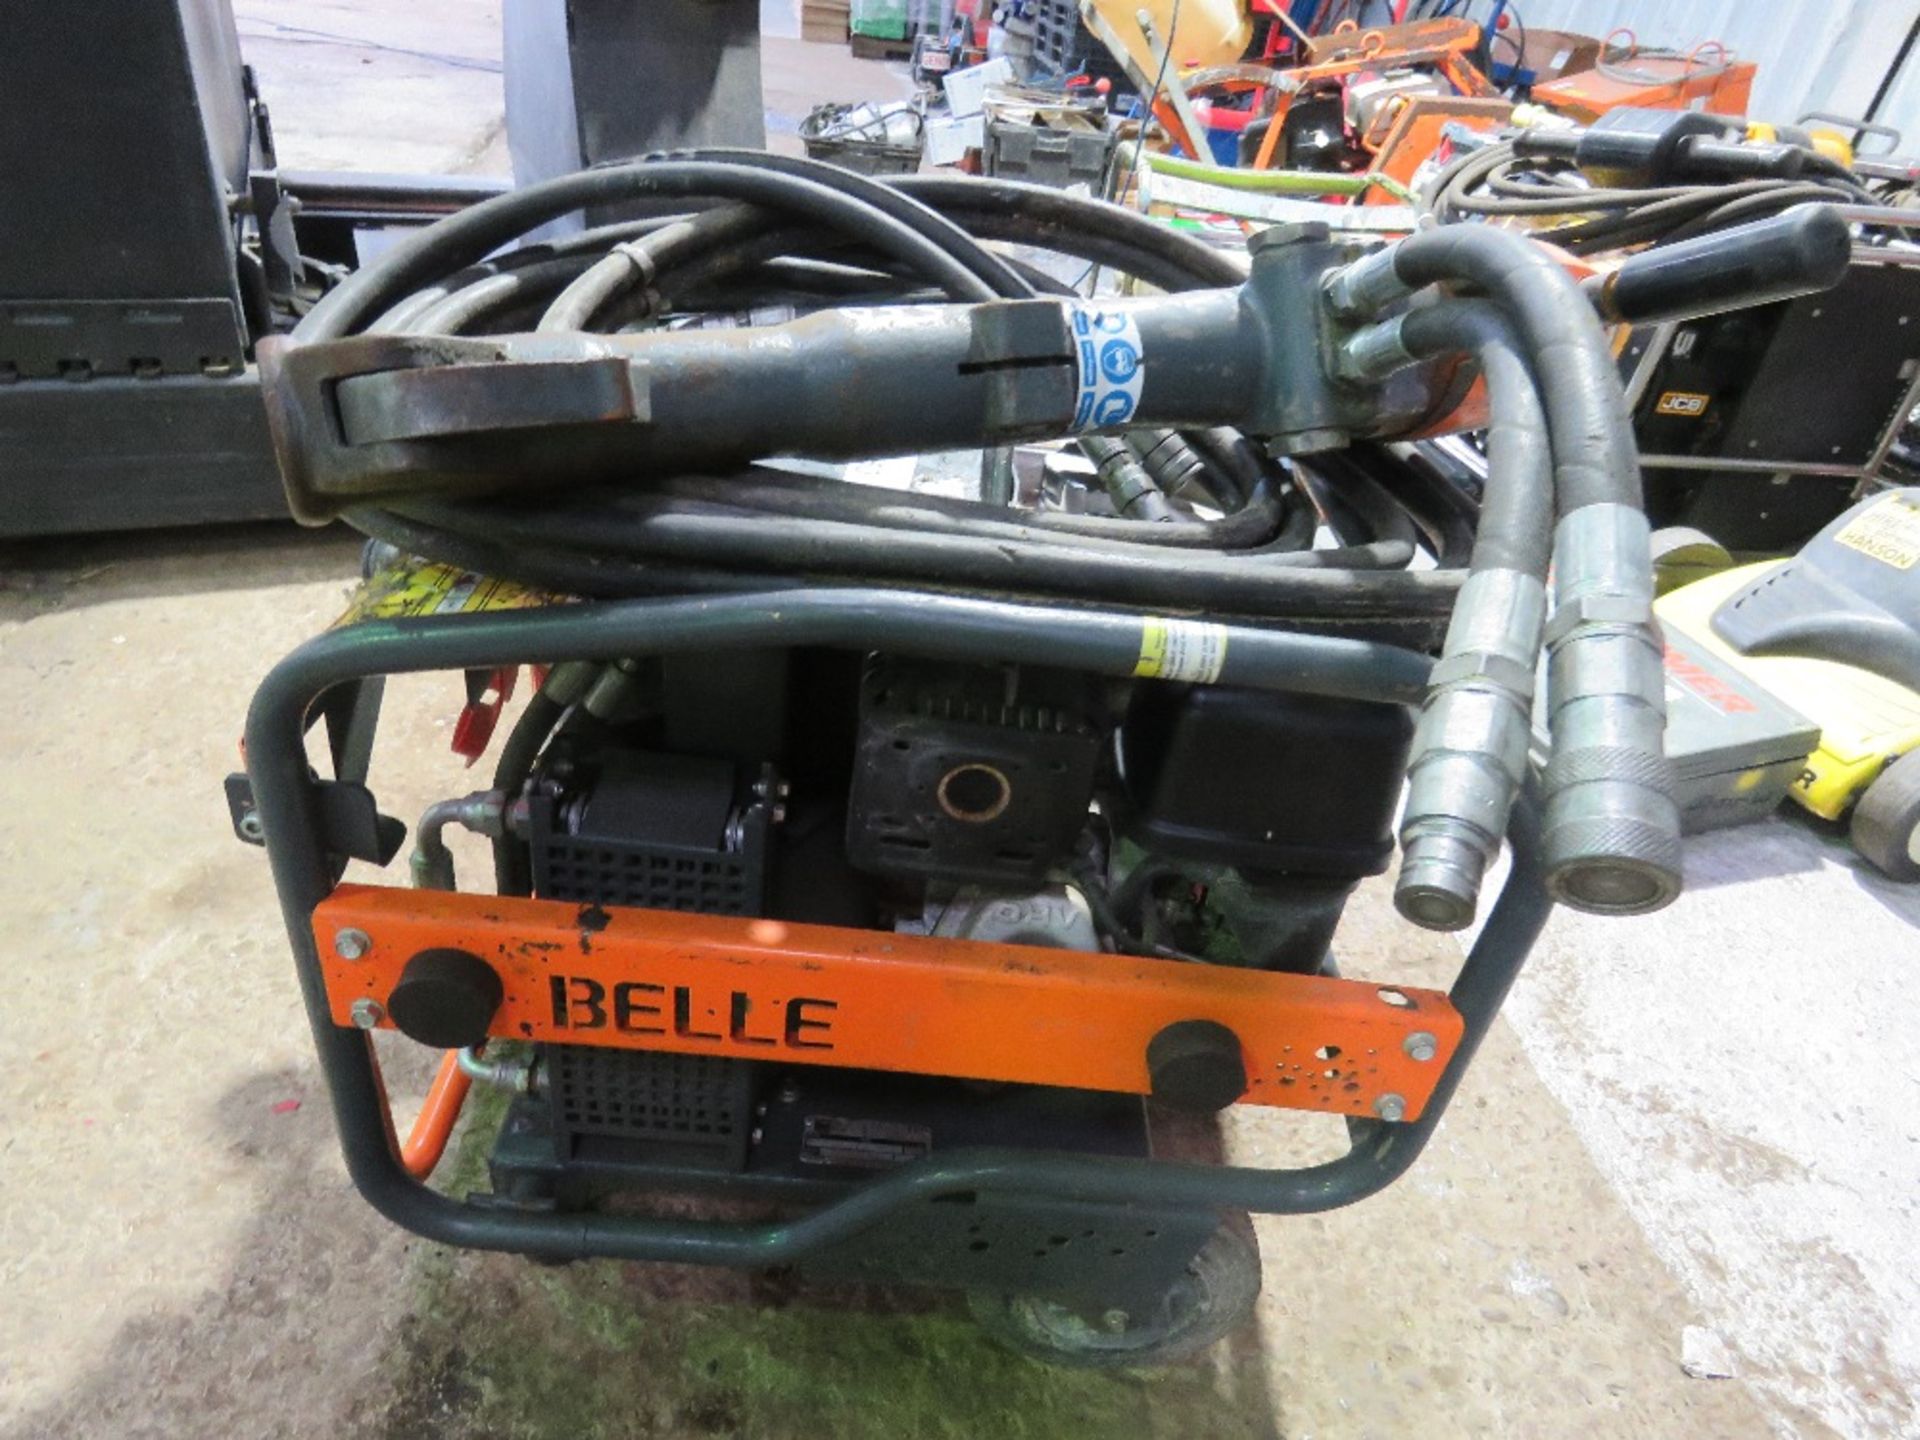 BELLE BULLDOG 20/140 PETROL ENGINED HYDRAULIC BREAKER PACK WITH HOSE AND GUN.